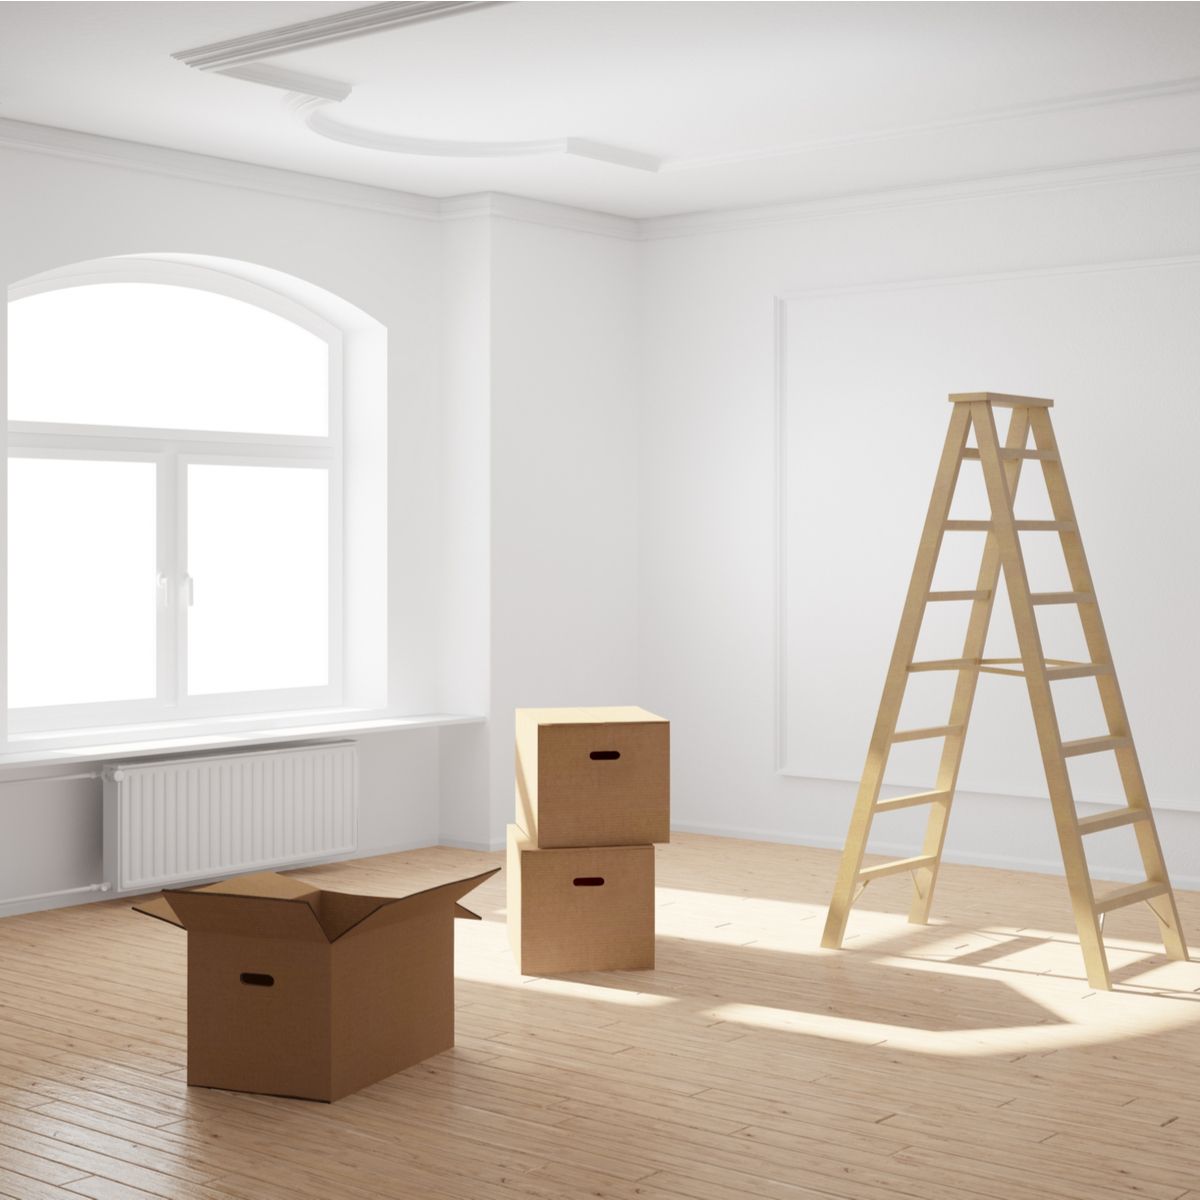 Tenant Move Out Checklist